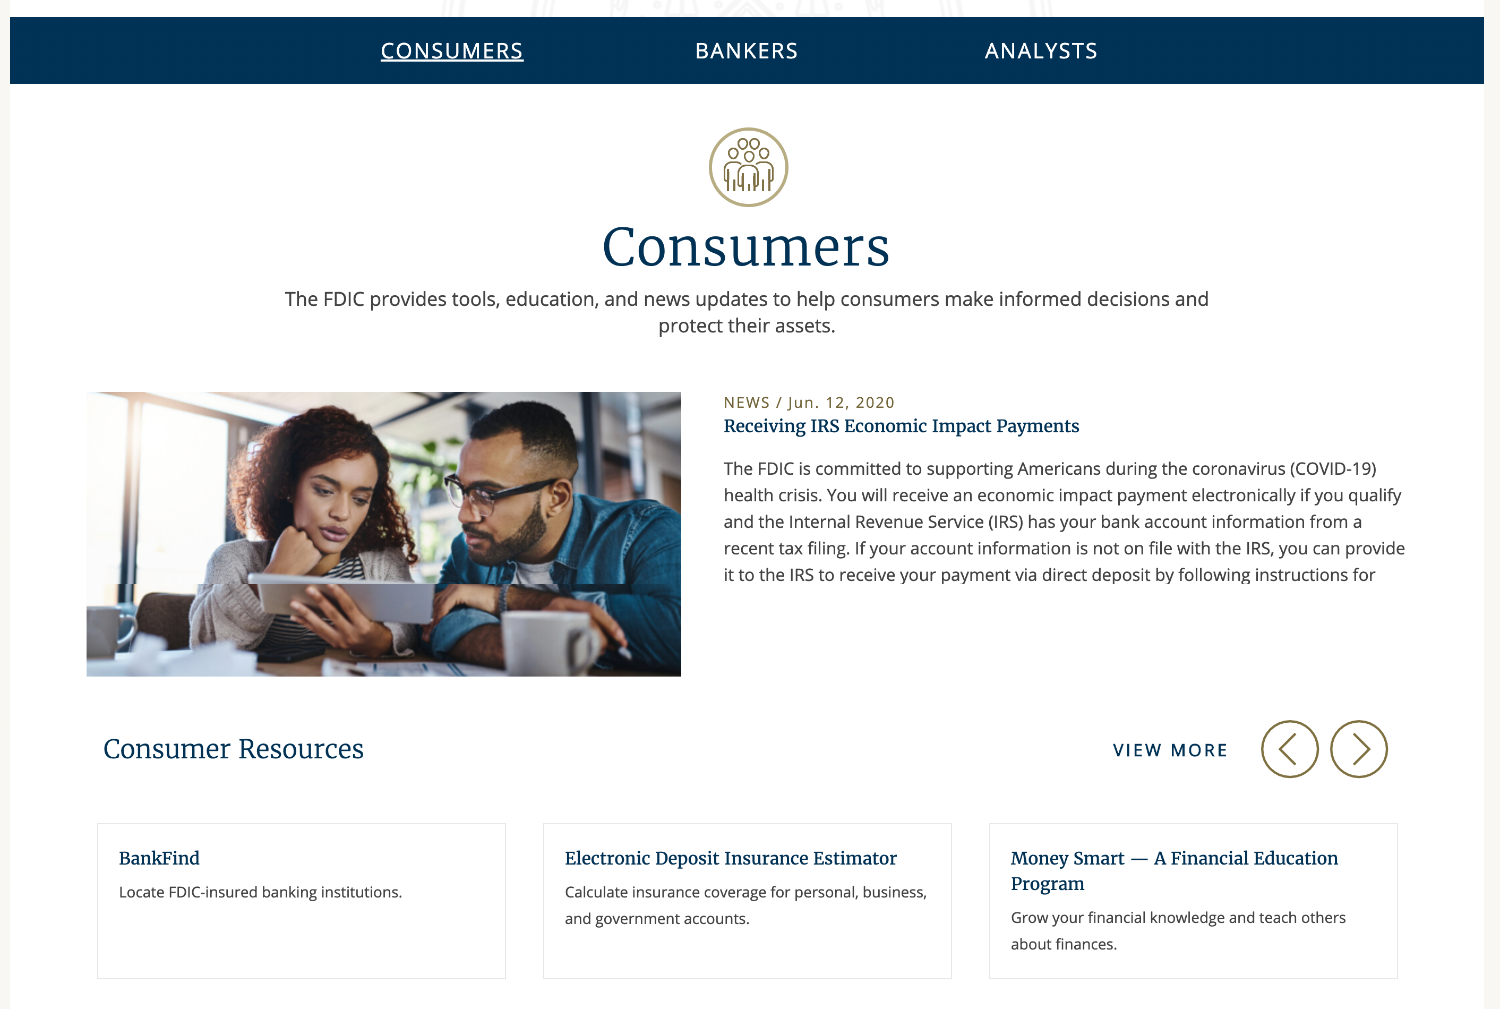 An example of the Consumers section of the FDIC homepage